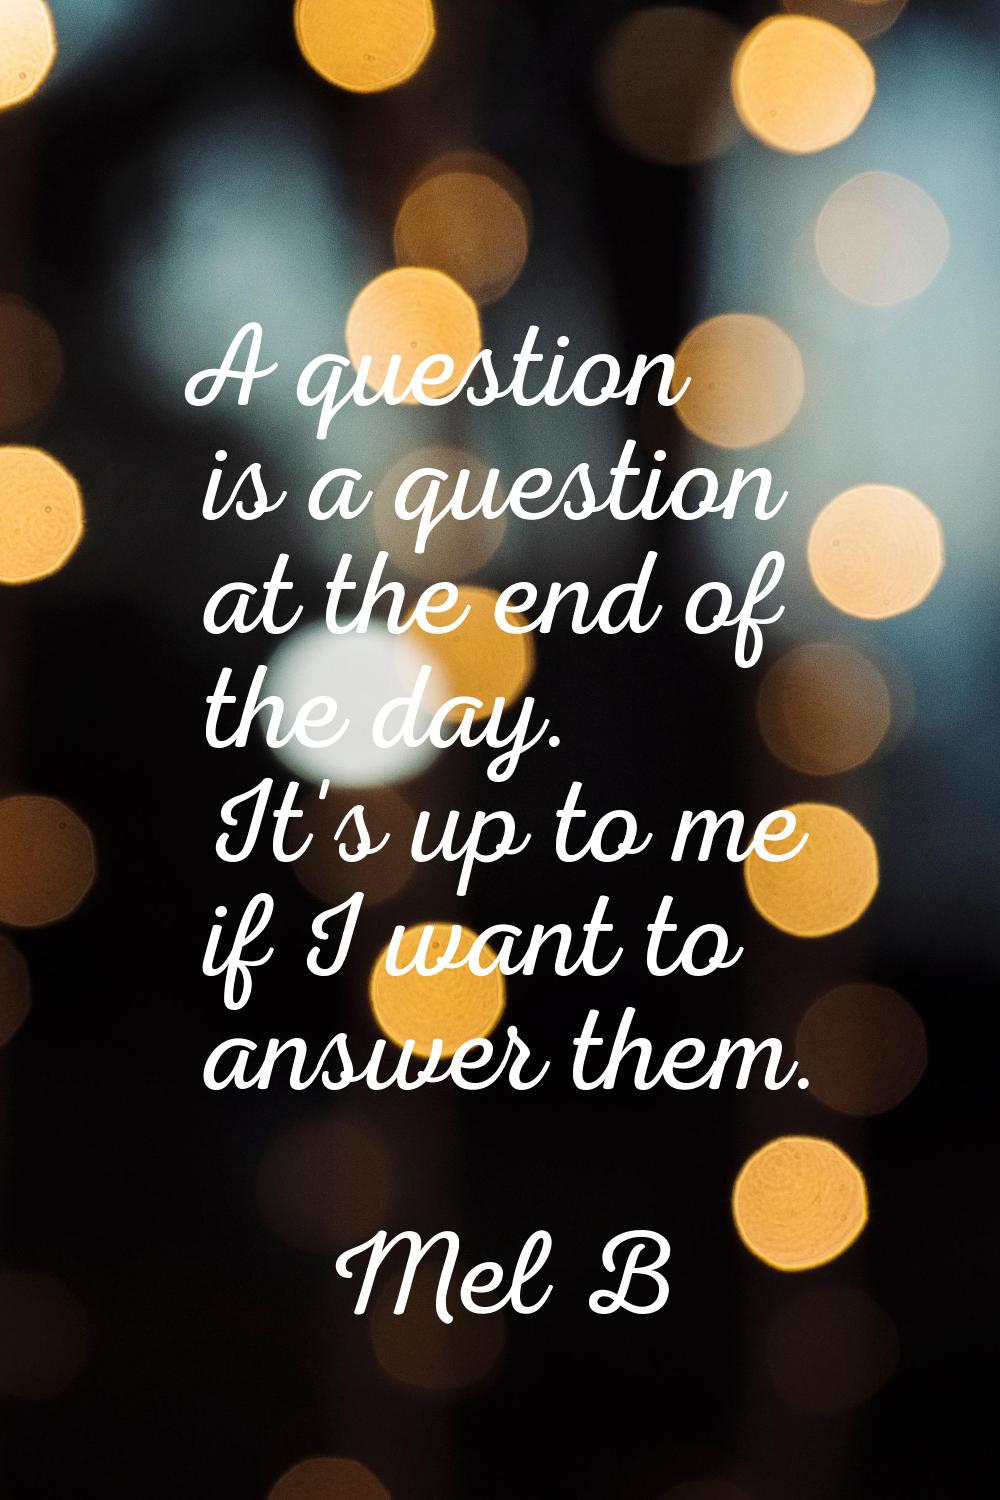 A question is a question at the end of the day. It's up to me if I want to answer them.